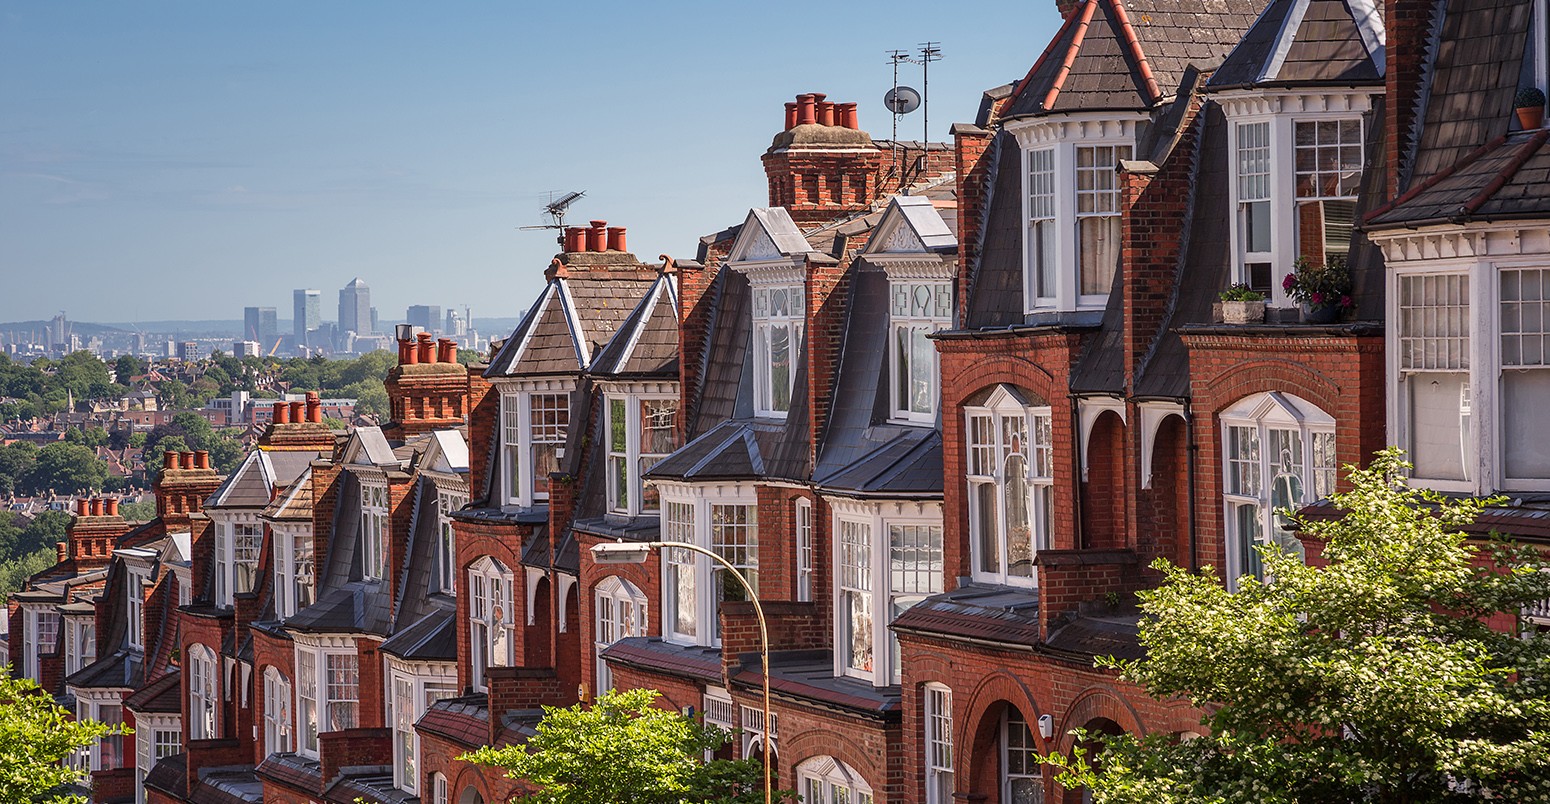 Houses in a panoramic shot from Muswell Hill, London, UK.